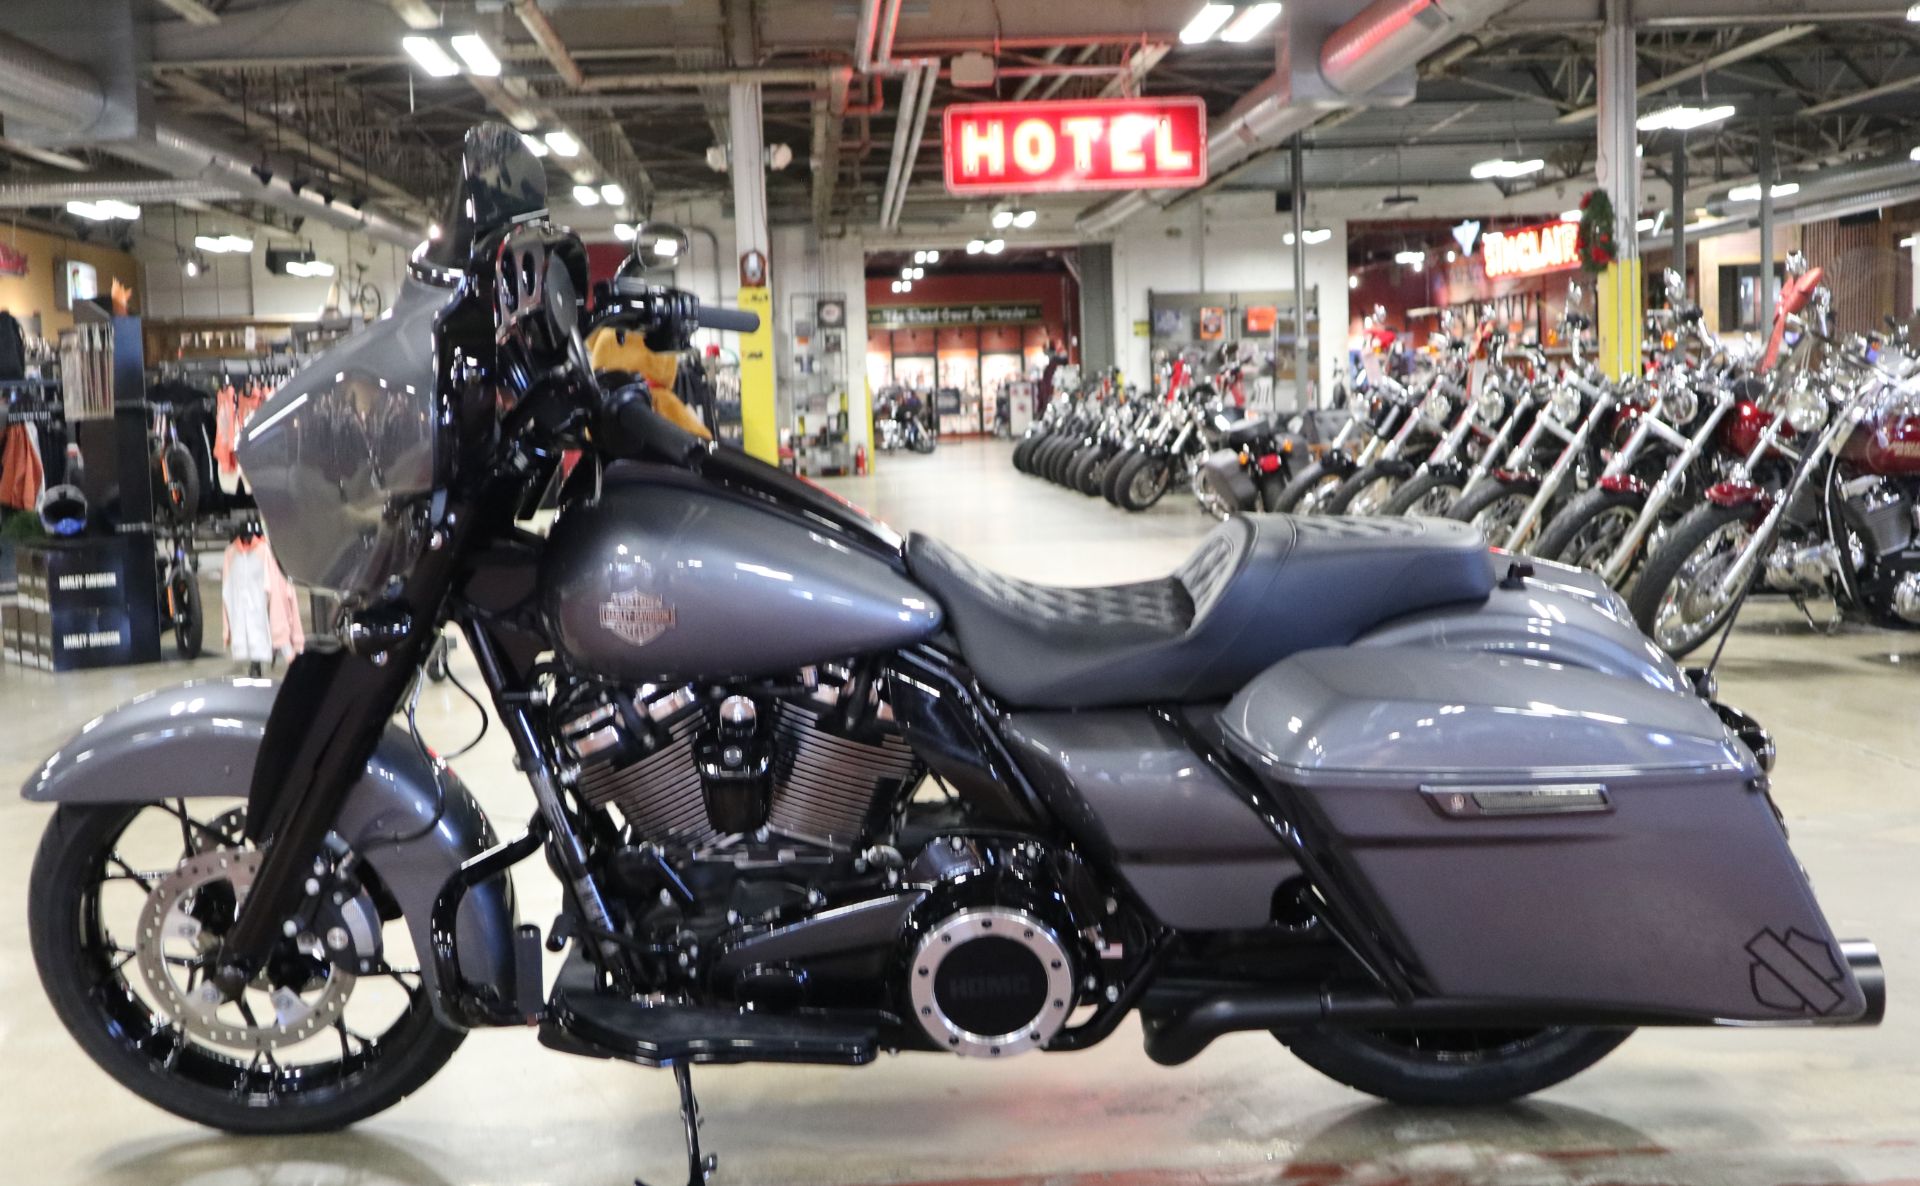 2021 Harley-Davidson Street Glide® Special in New London, Connecticut - Photo 5